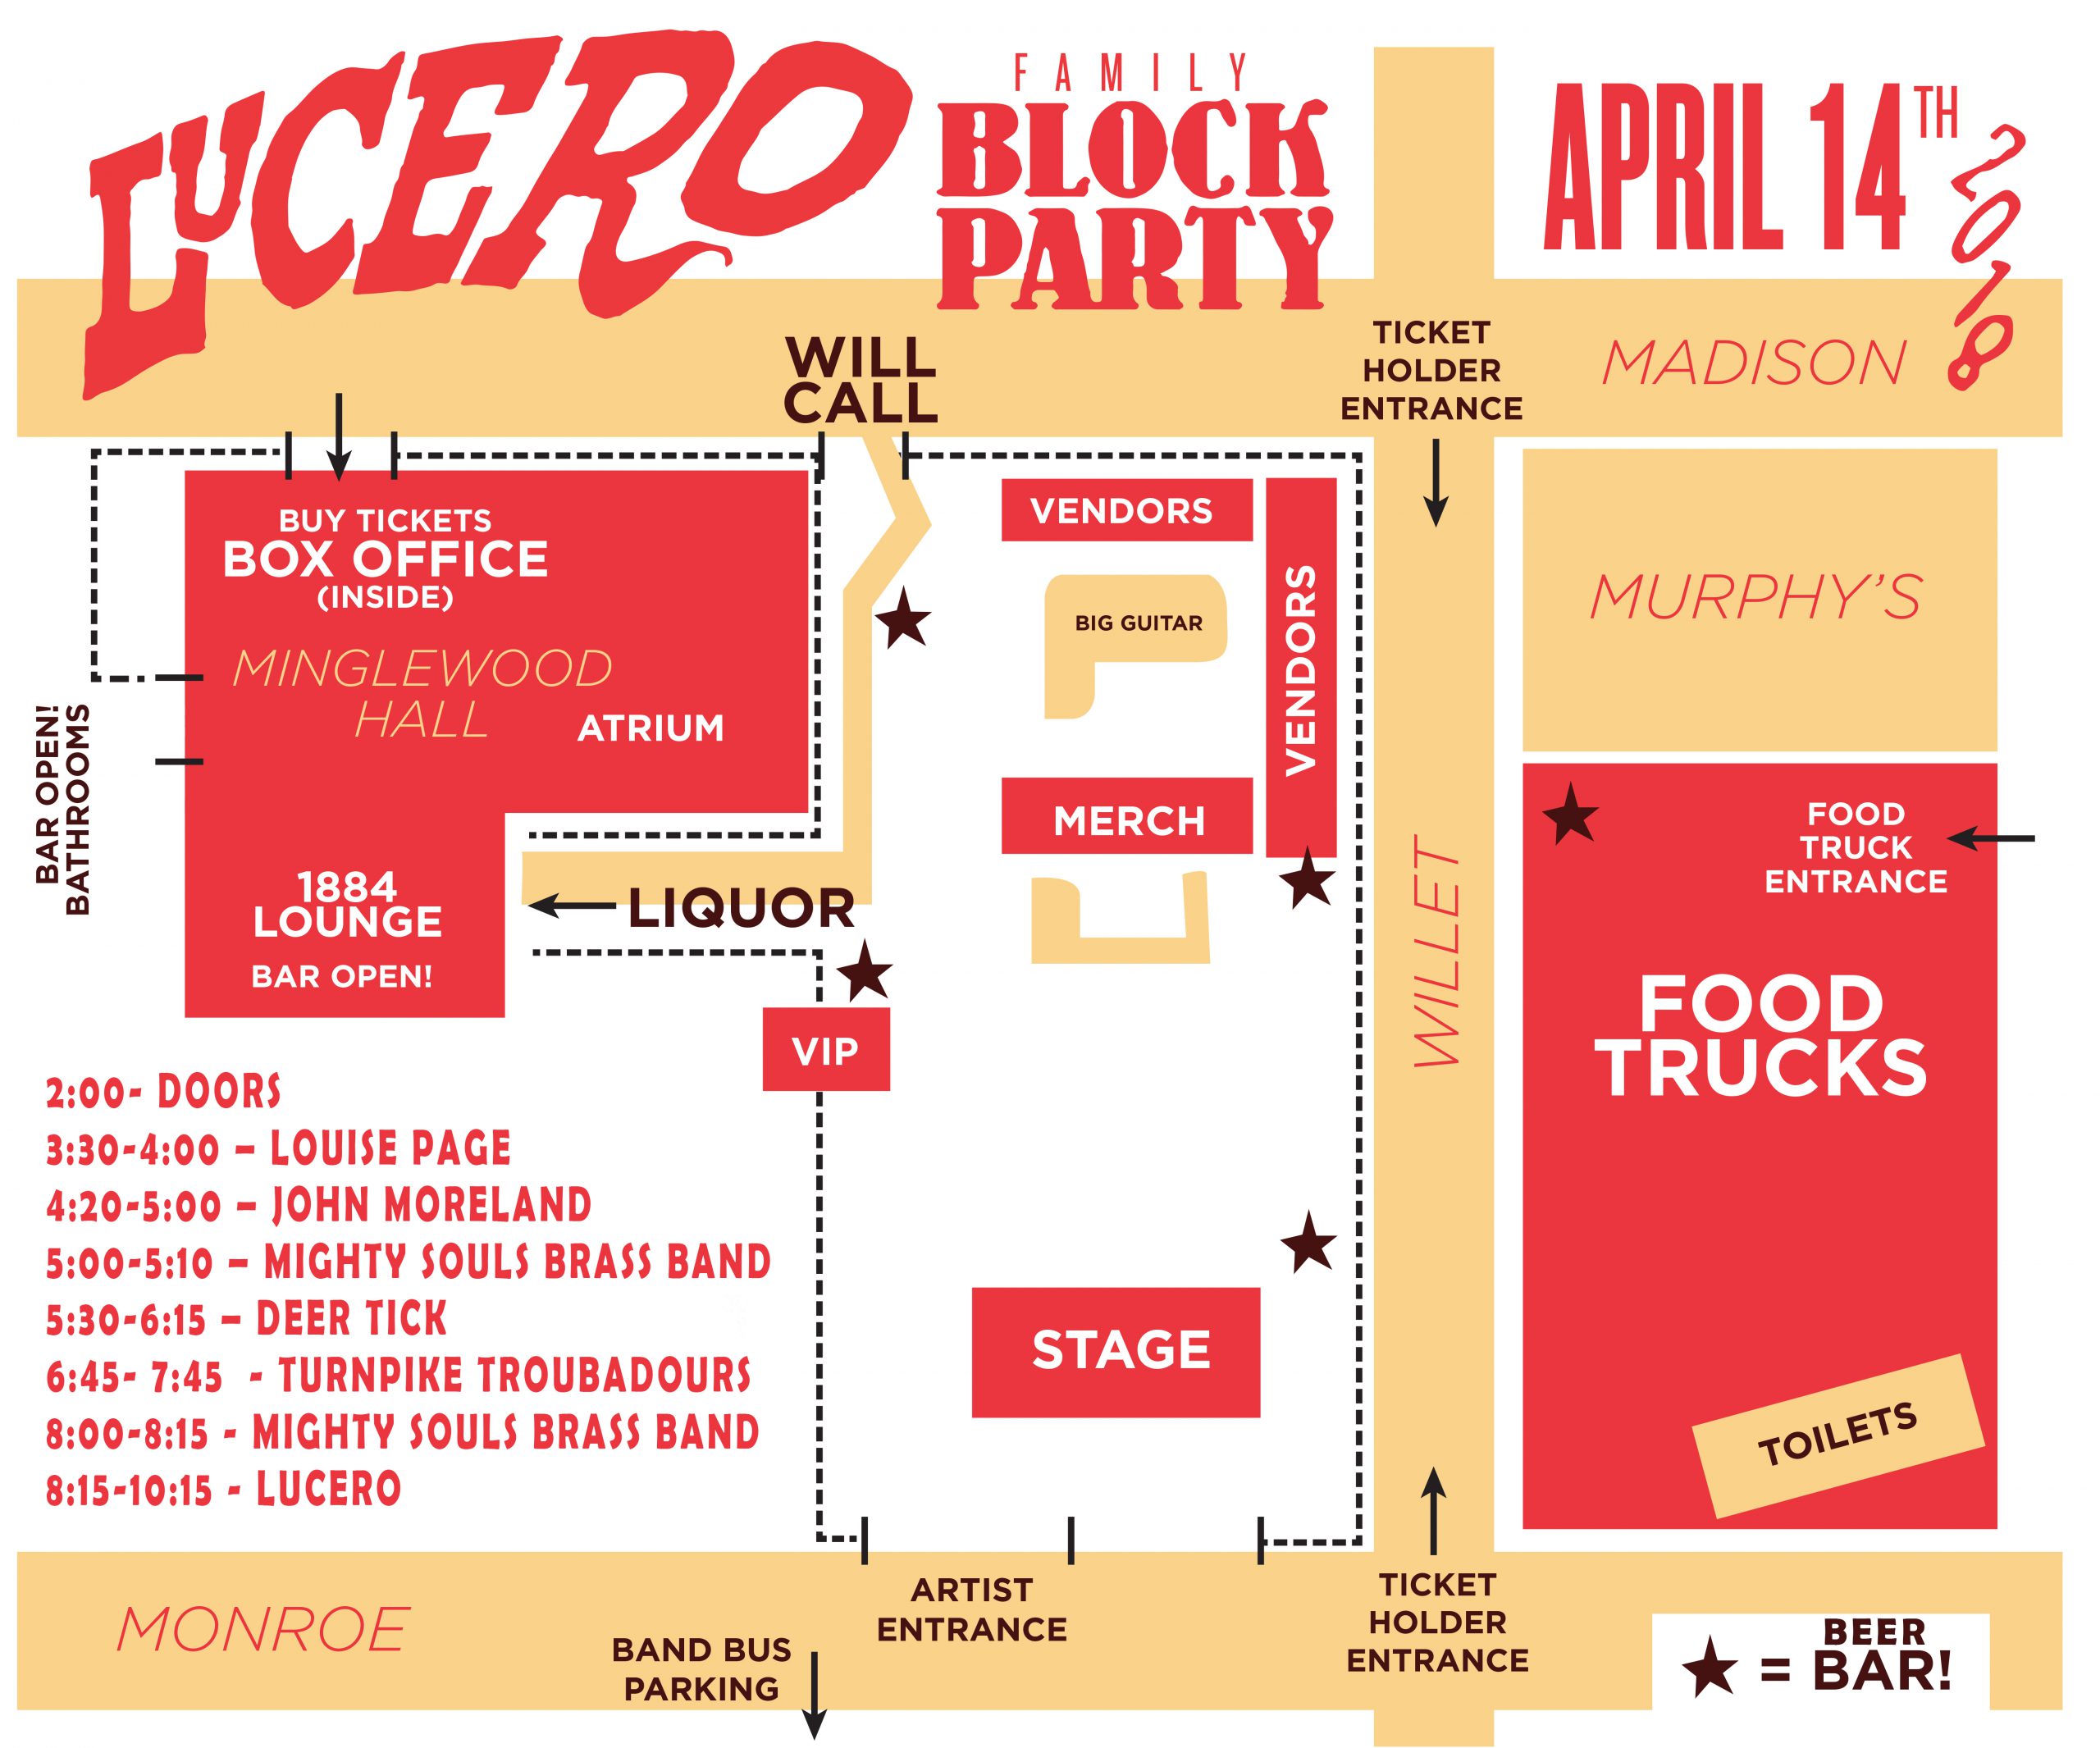 THIS WEEKEND!!! Lucero Family Block Party Lucero